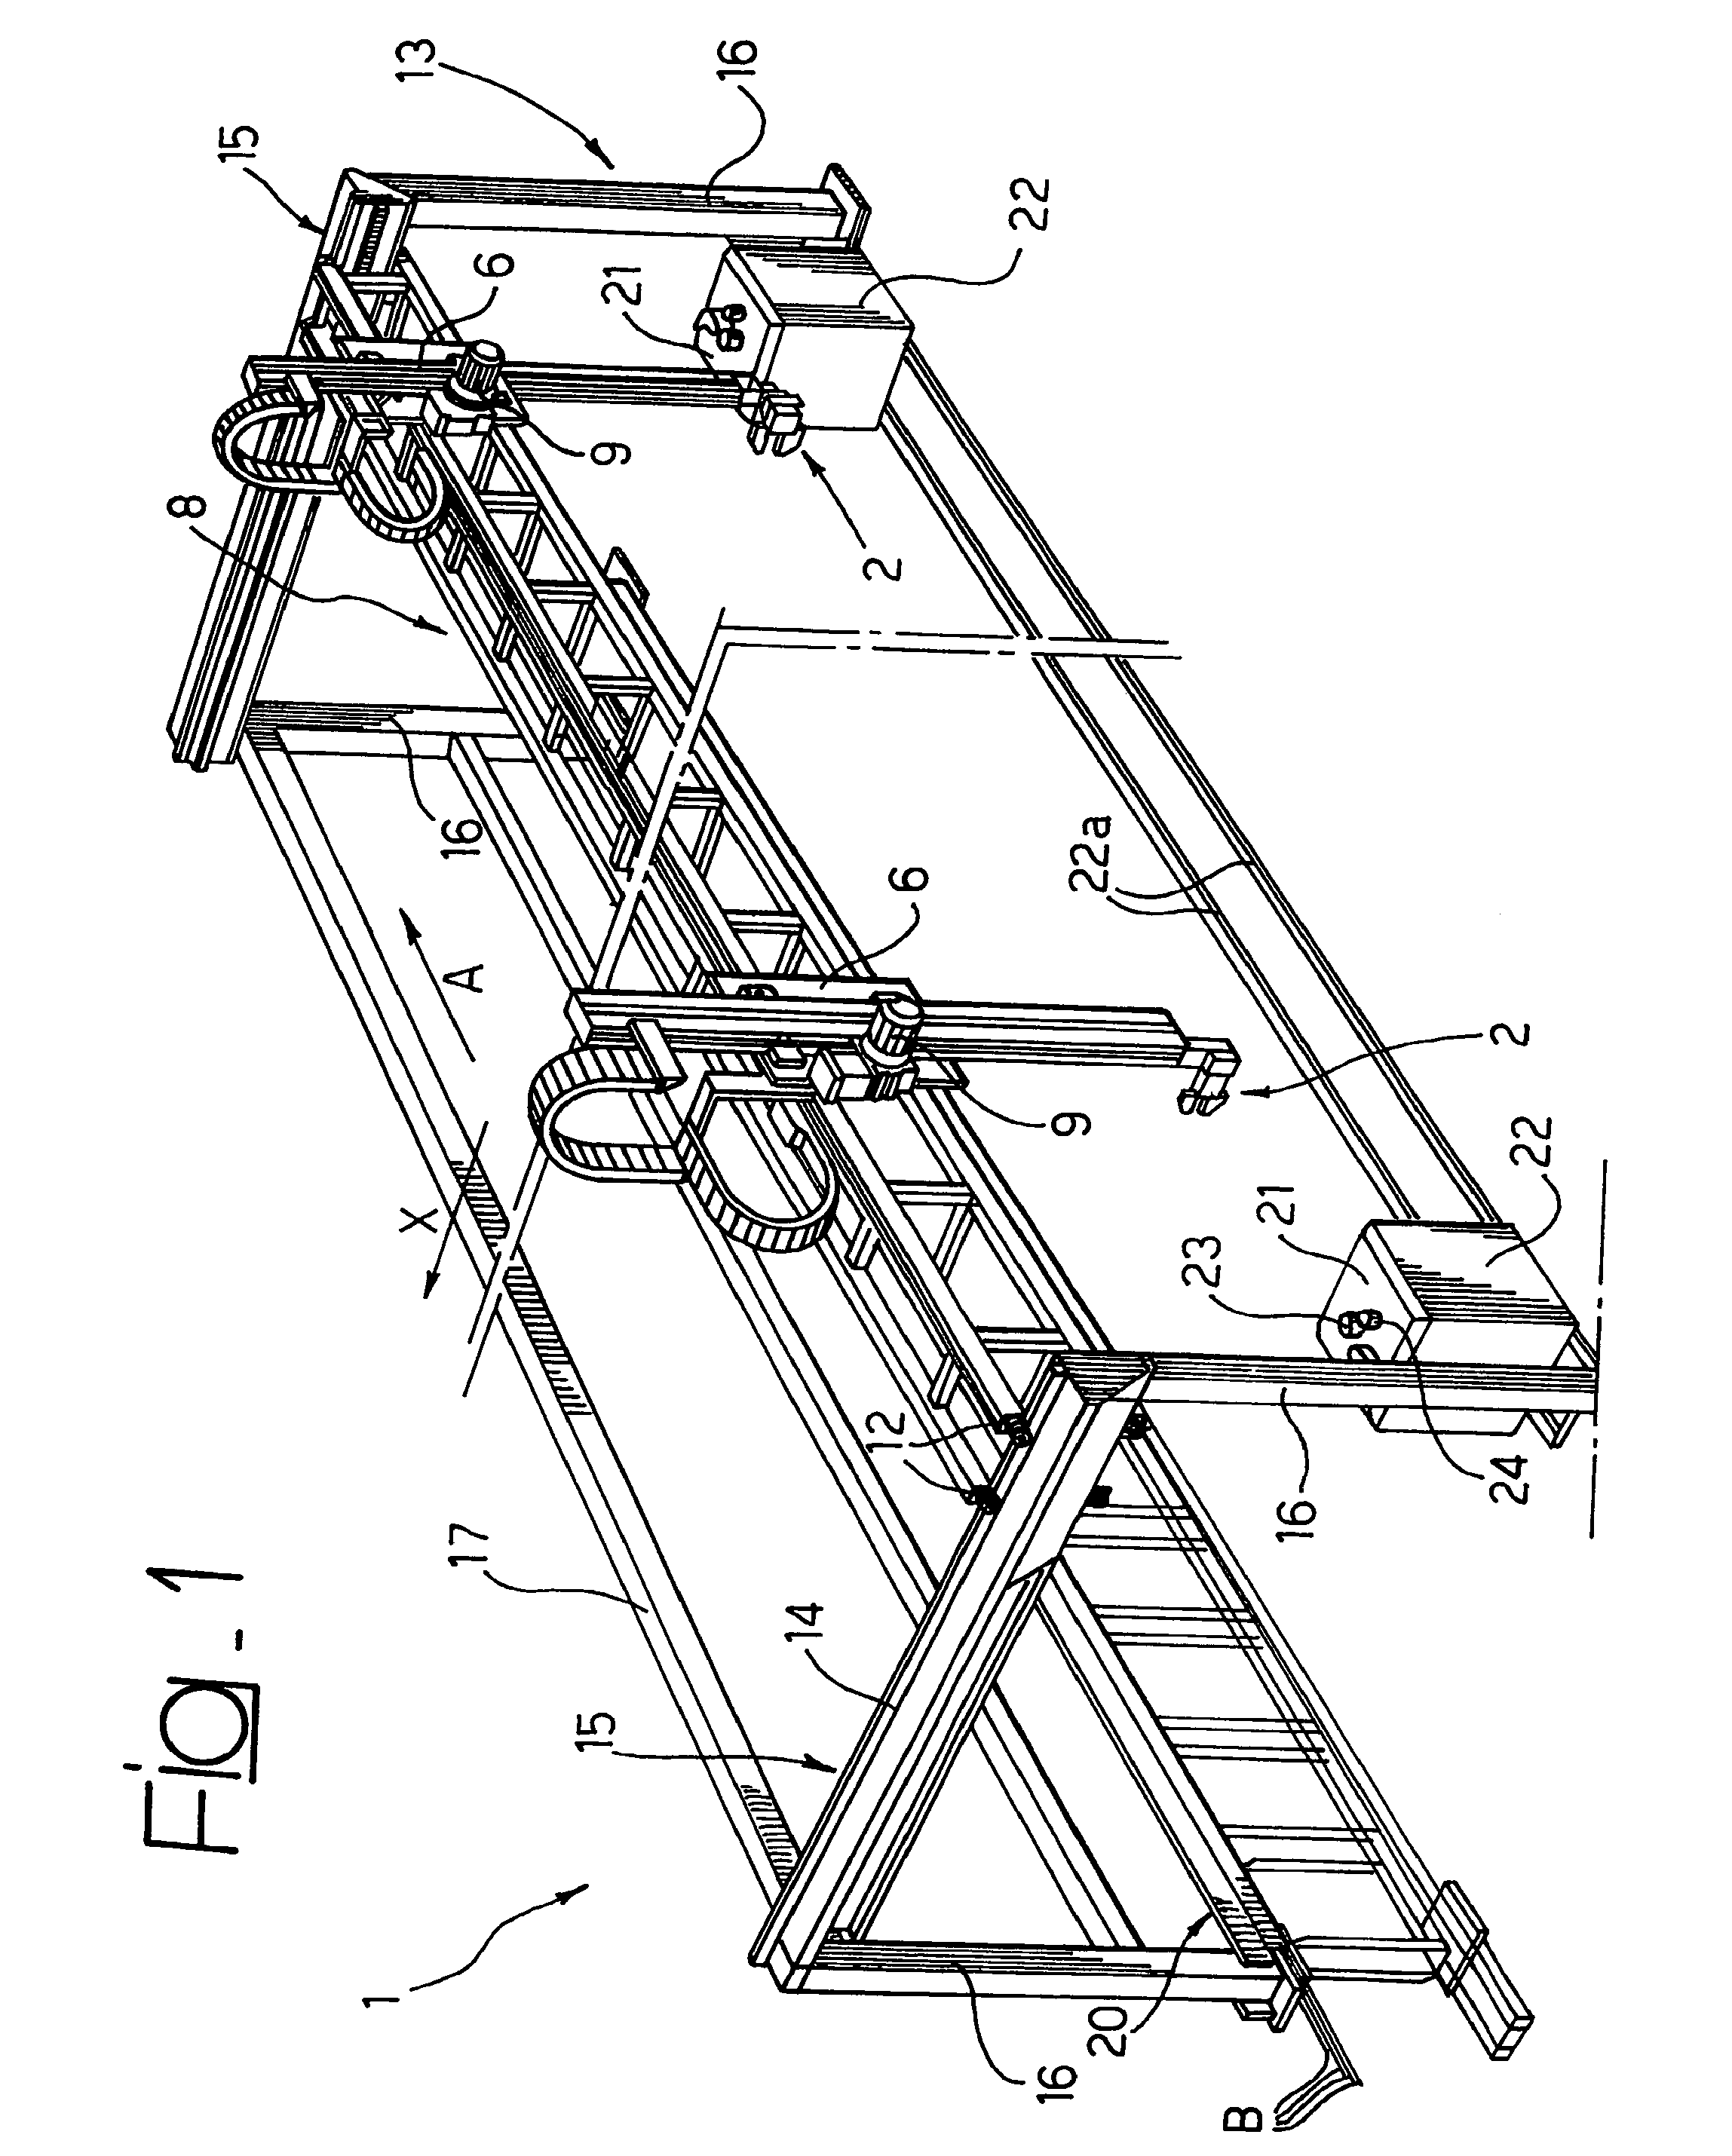 Installation for processing metal bars with improved means for transferring the bars, and method provided thereby